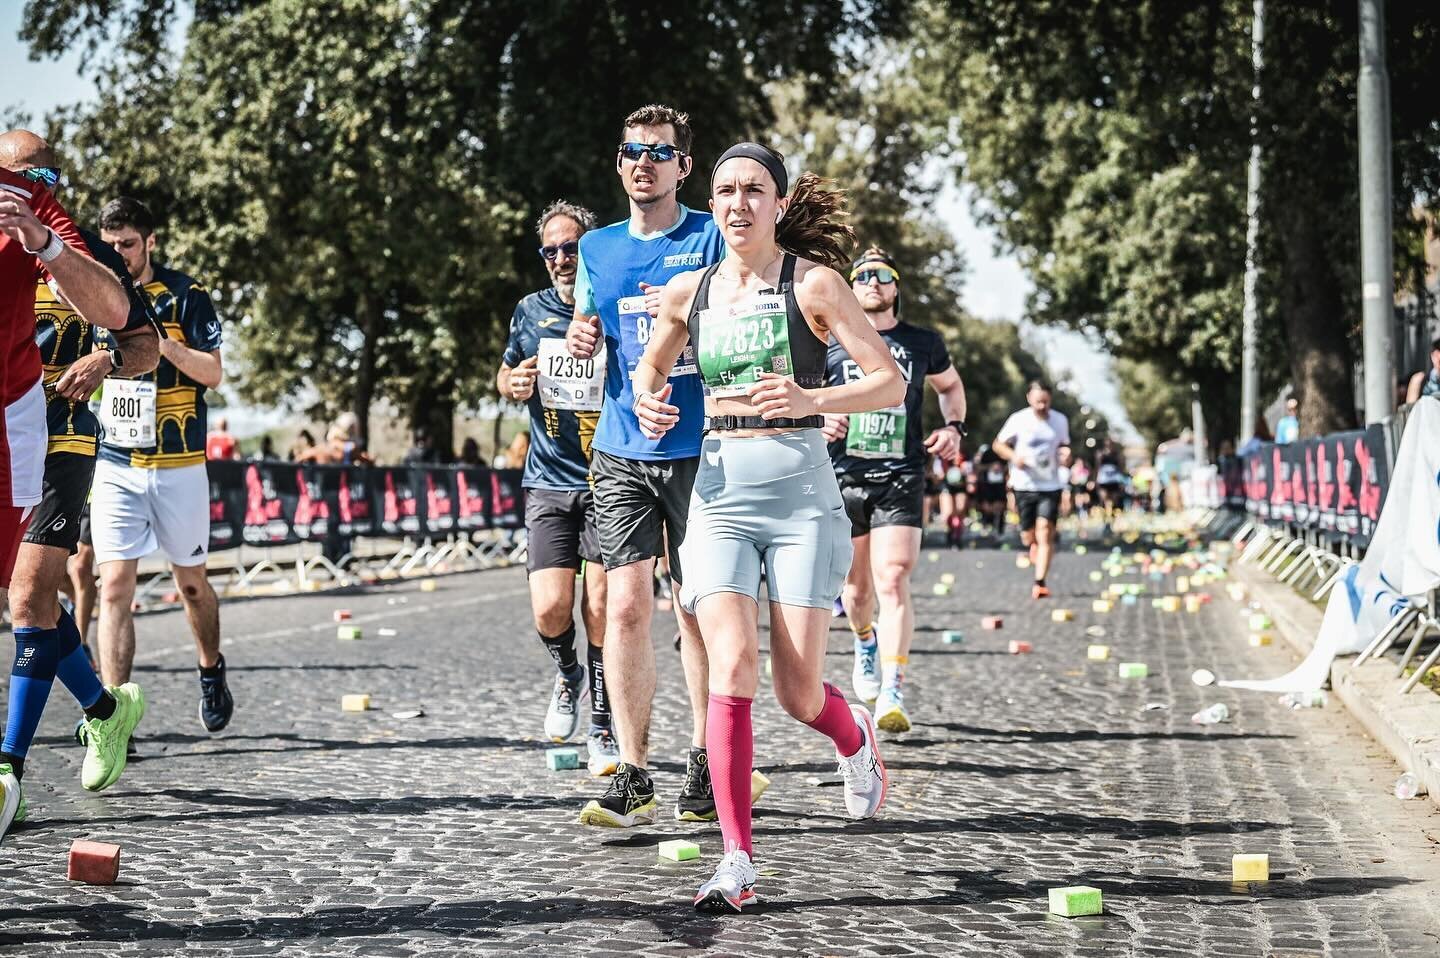 Too good not to share! 😅🇮🇹 🏰 That last face was the final 200m push. 🤣

A full recap of nutrition &amp; training for the marathon now up on my blog. I follow a #glutenfree personalized #lowfodmap diet so this will be of interest to you runners w